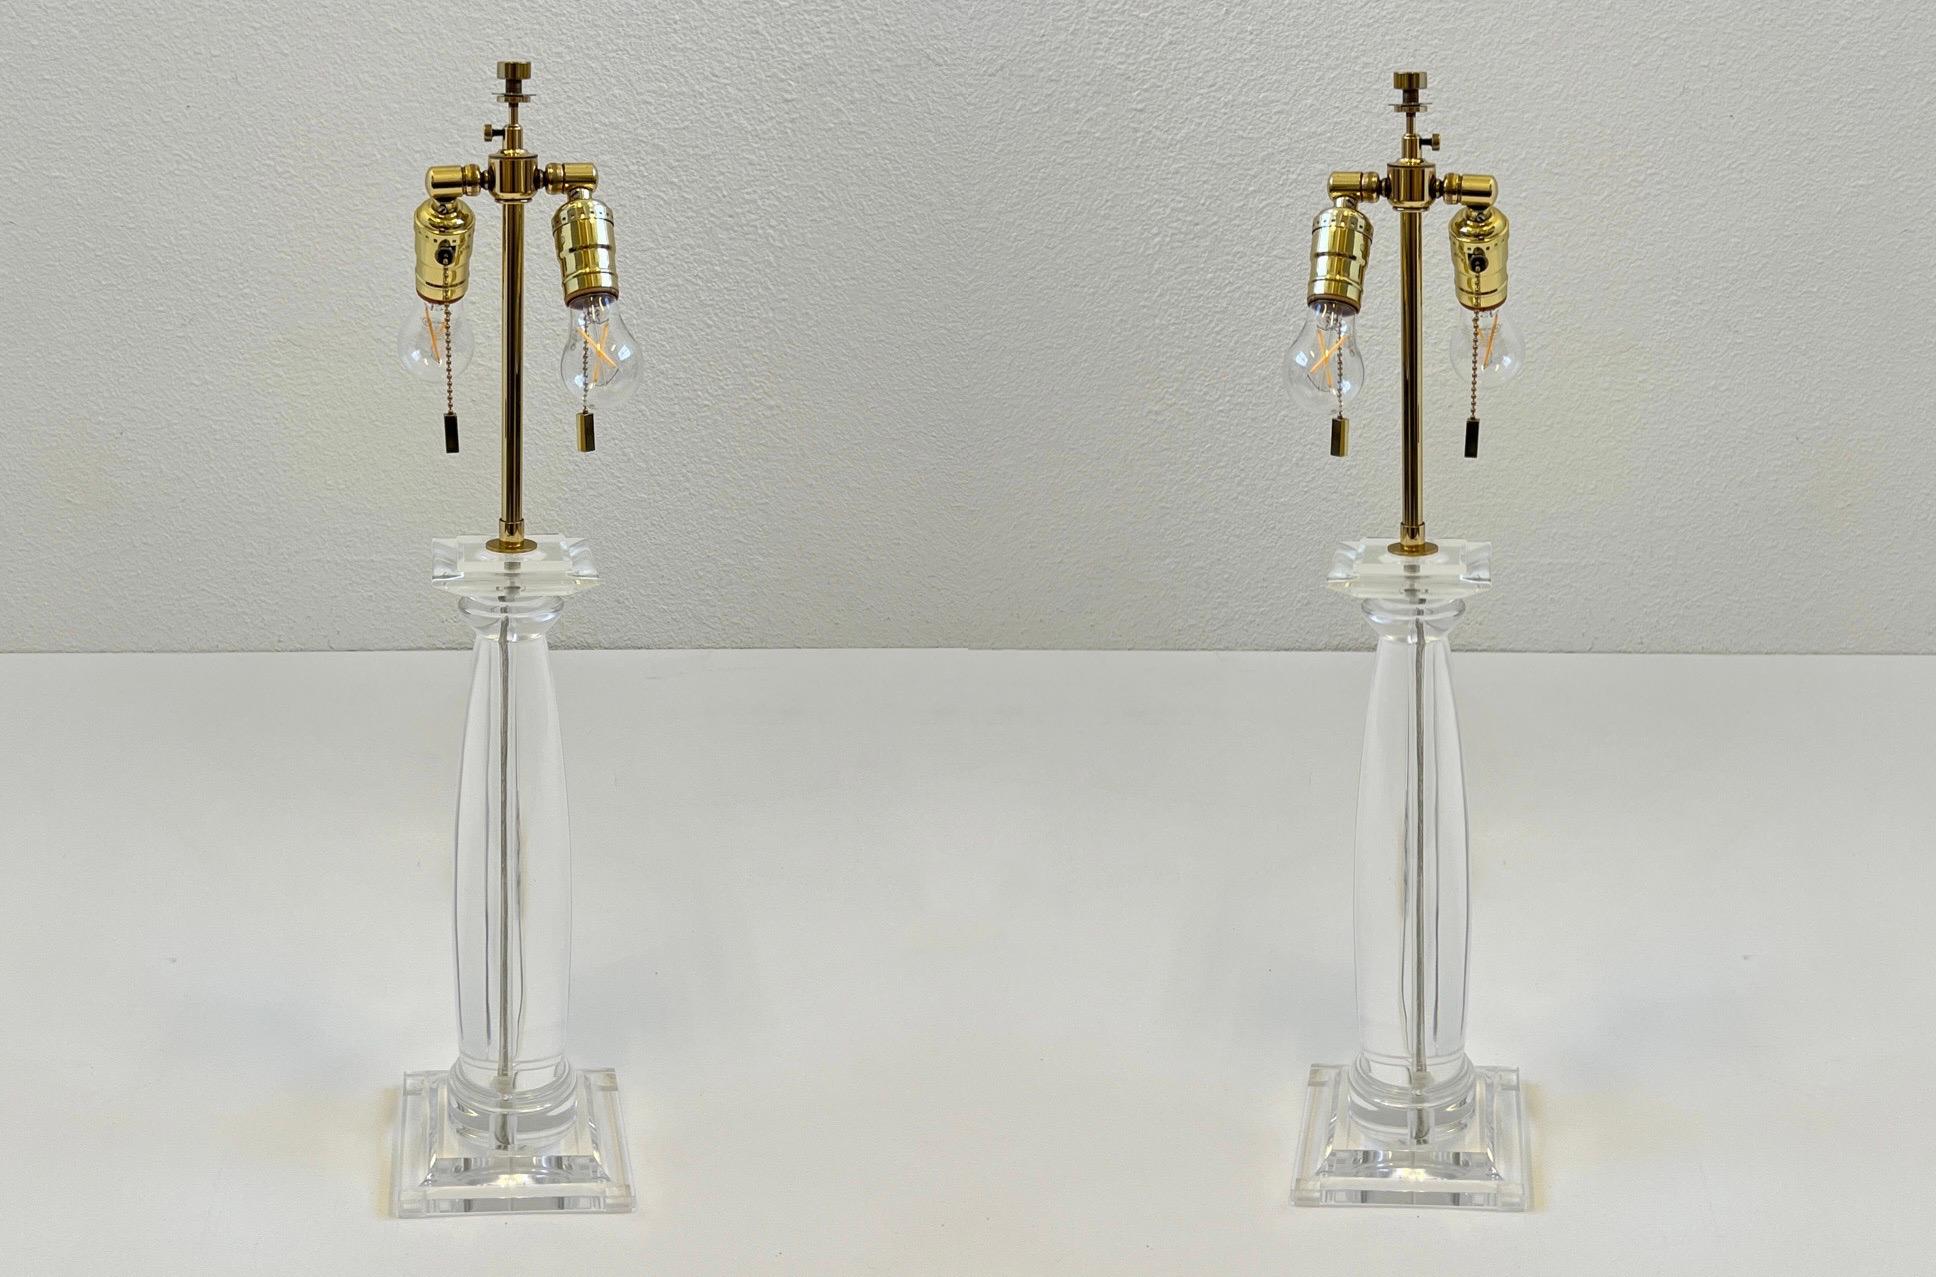 Glamorous pair of 1980s clear lucite and polished brass “Greek Column Table Lamps” by Karl Springer. 

Constructed of solid acrylic and polish brass.
Newly rewired and new shades. 
Each lamp takes two 75w Max Edison bulbs. 

Measurements with